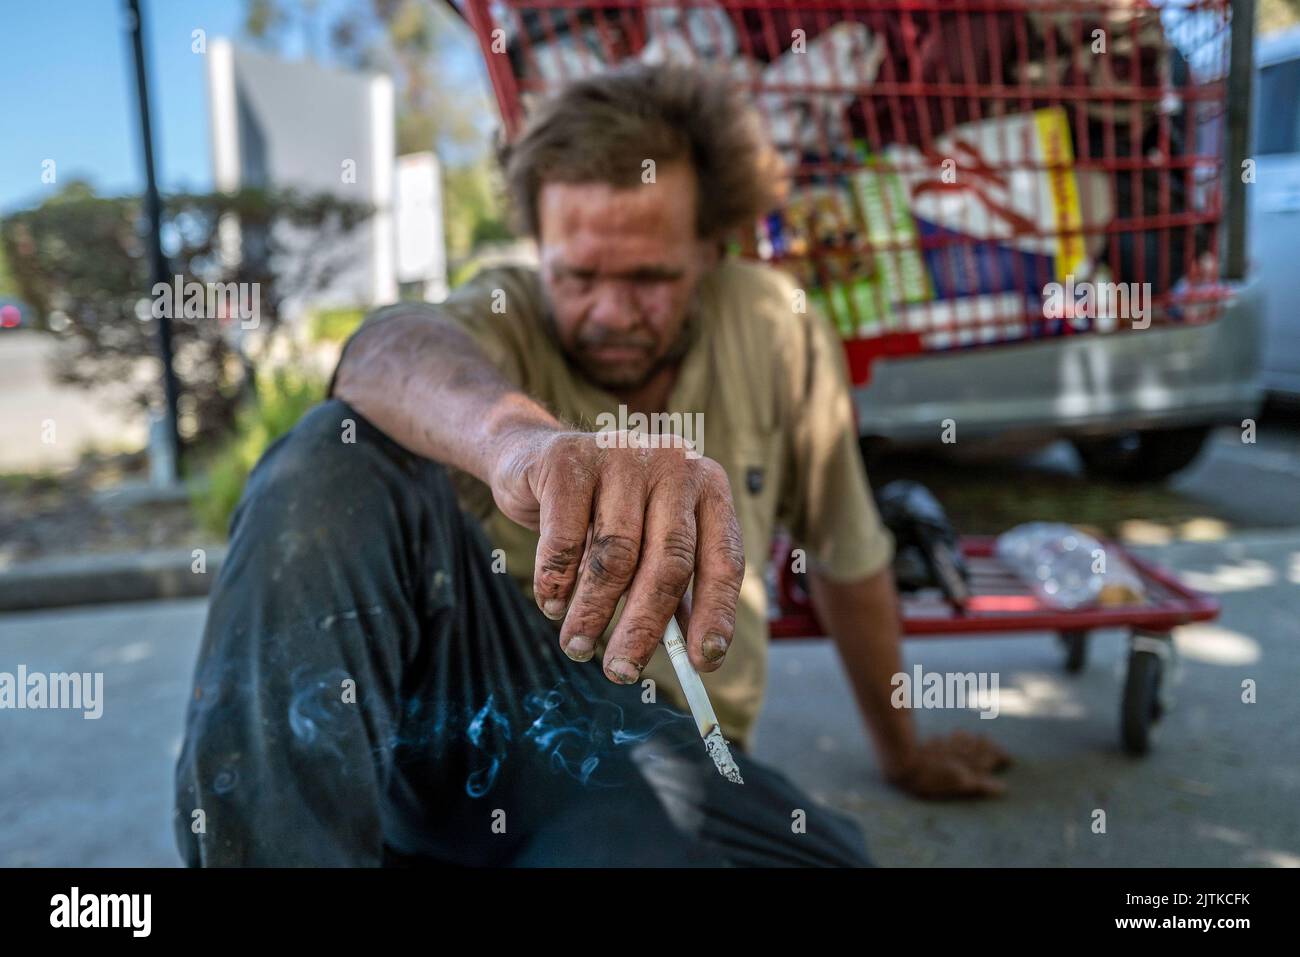 Vacaville, California, USA. 27th July, 2022. MARK RIPPEE, 59, who is blind, rests on the ground holding a cigarette in Vacaville. He said he needs someone to give him a ride to look for apartments and a job. (Credit Image: © Renee C. Byer/Sacramento Bee/ZUMA Press Wire) Stock Photo